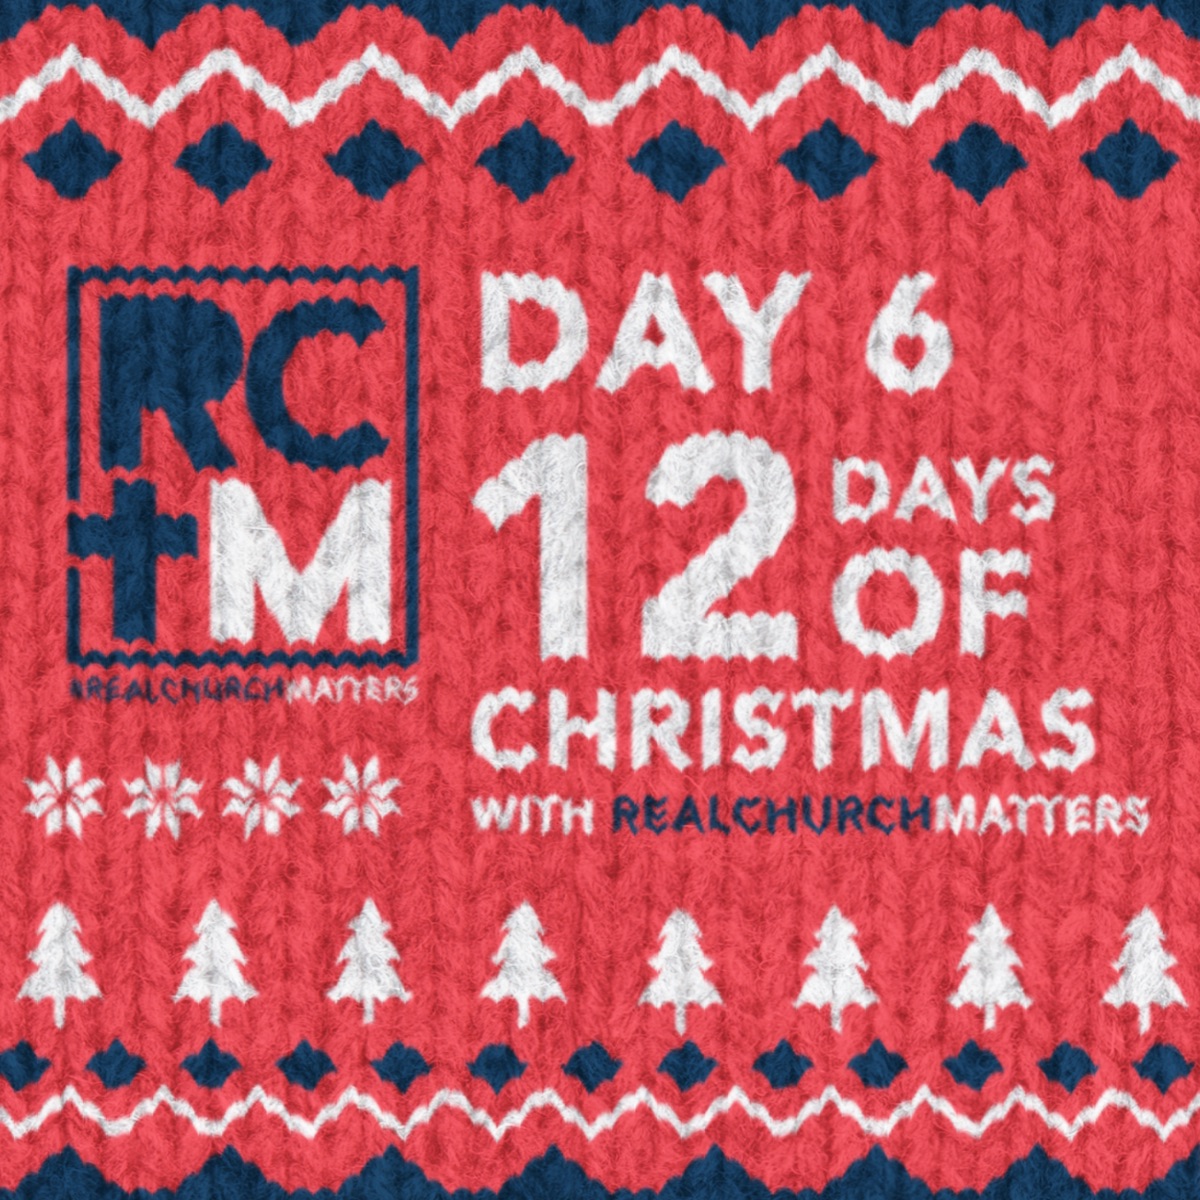 Day 6 of the 12 Days of Christmas with Real Church Matters